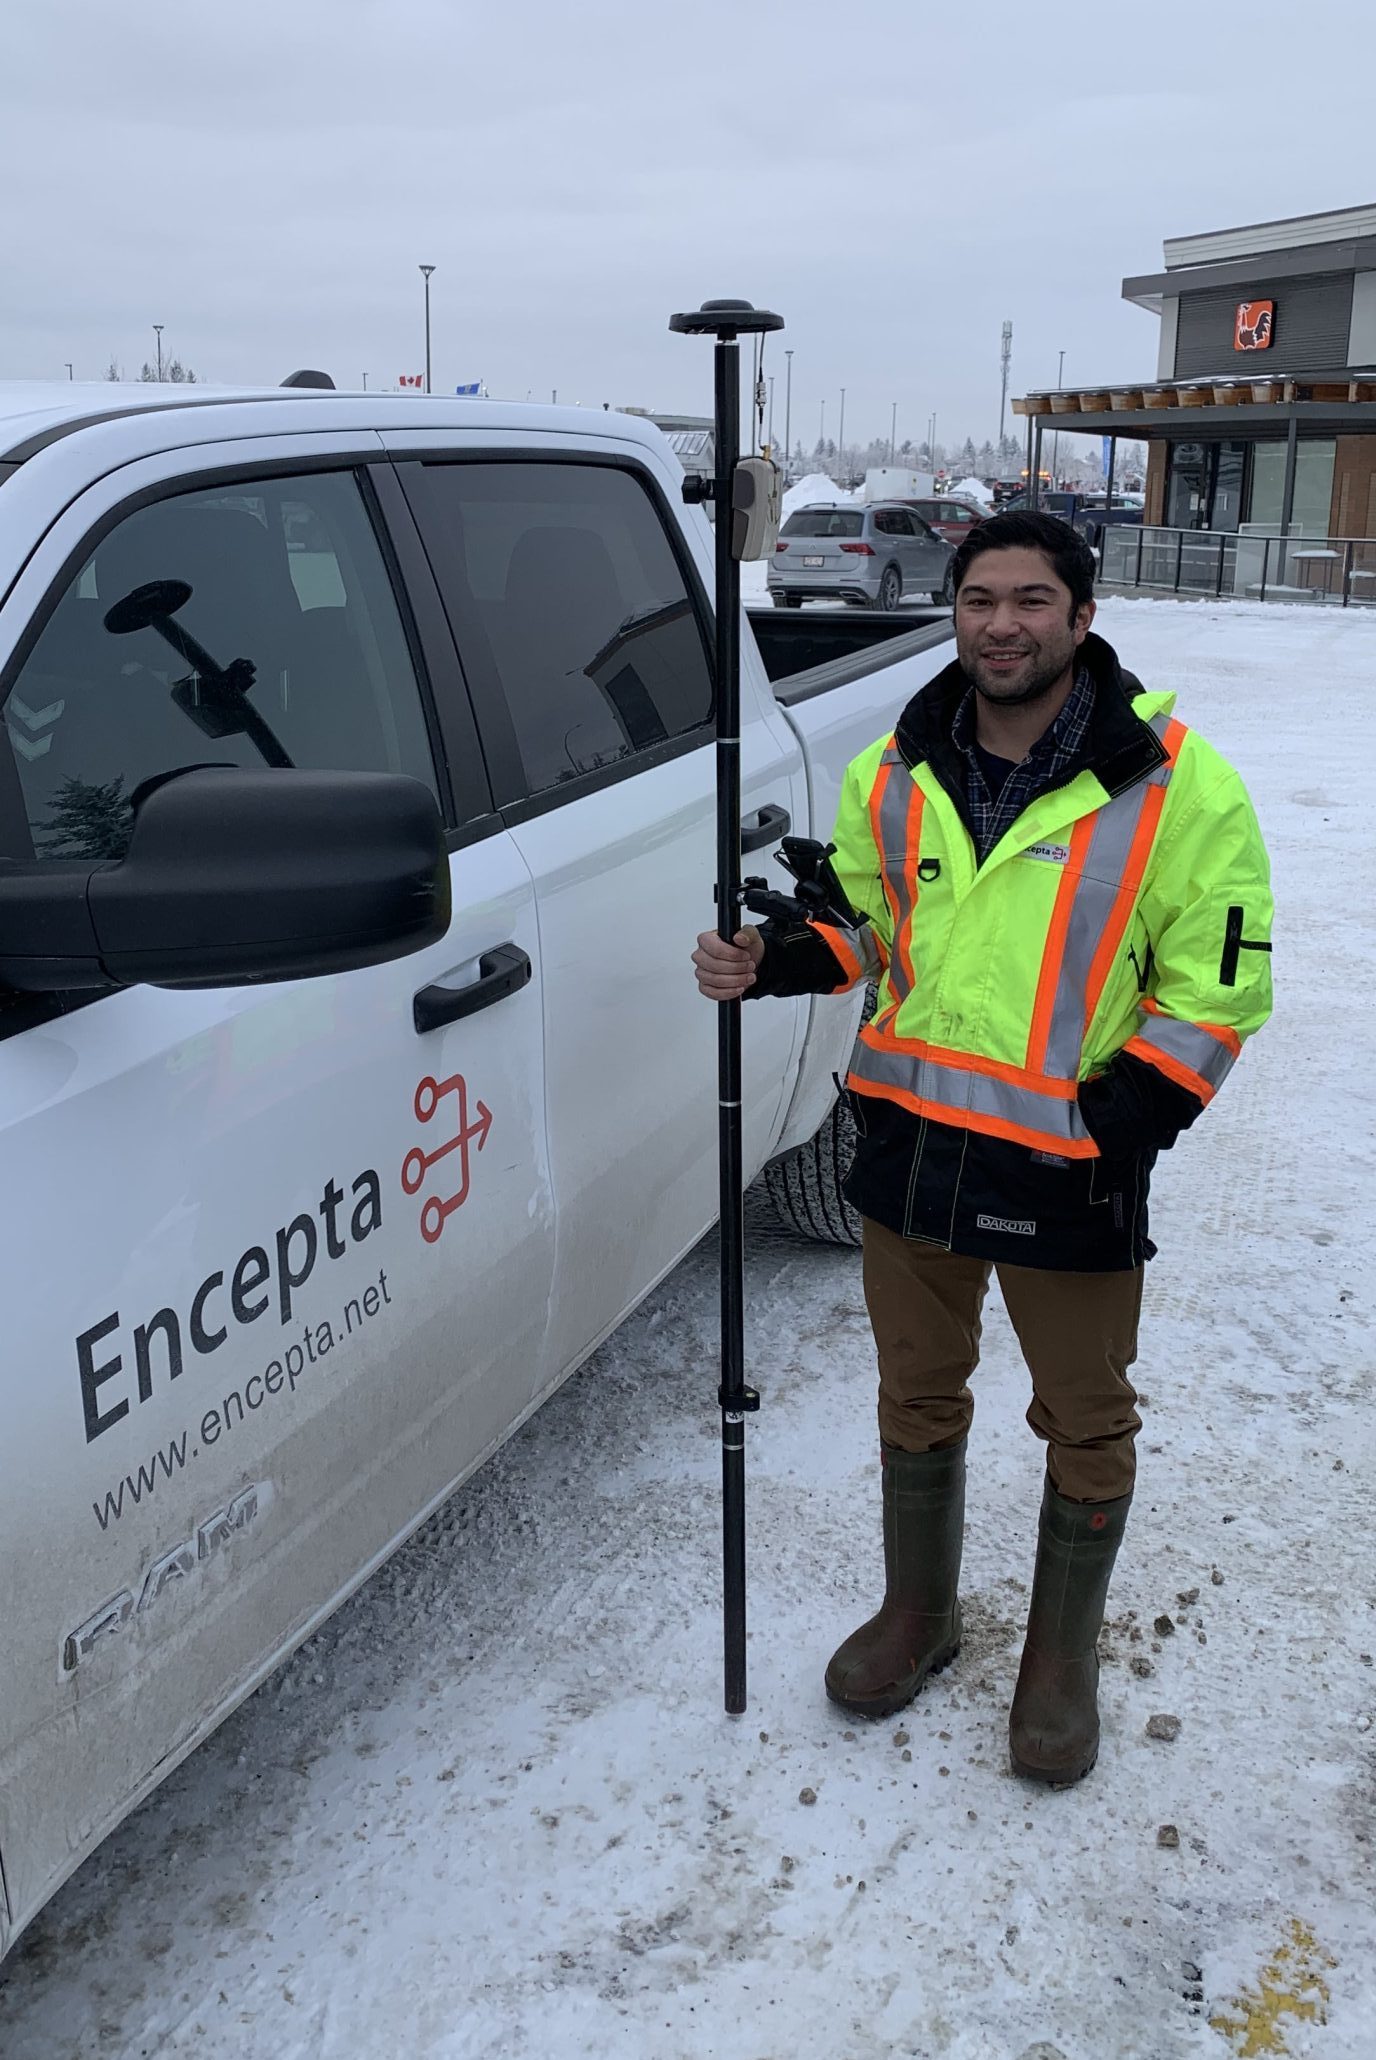 Customer Spotlight Zack Henry - Collecting GIS Points for Encepta with Eos Arrow Gold GNSS